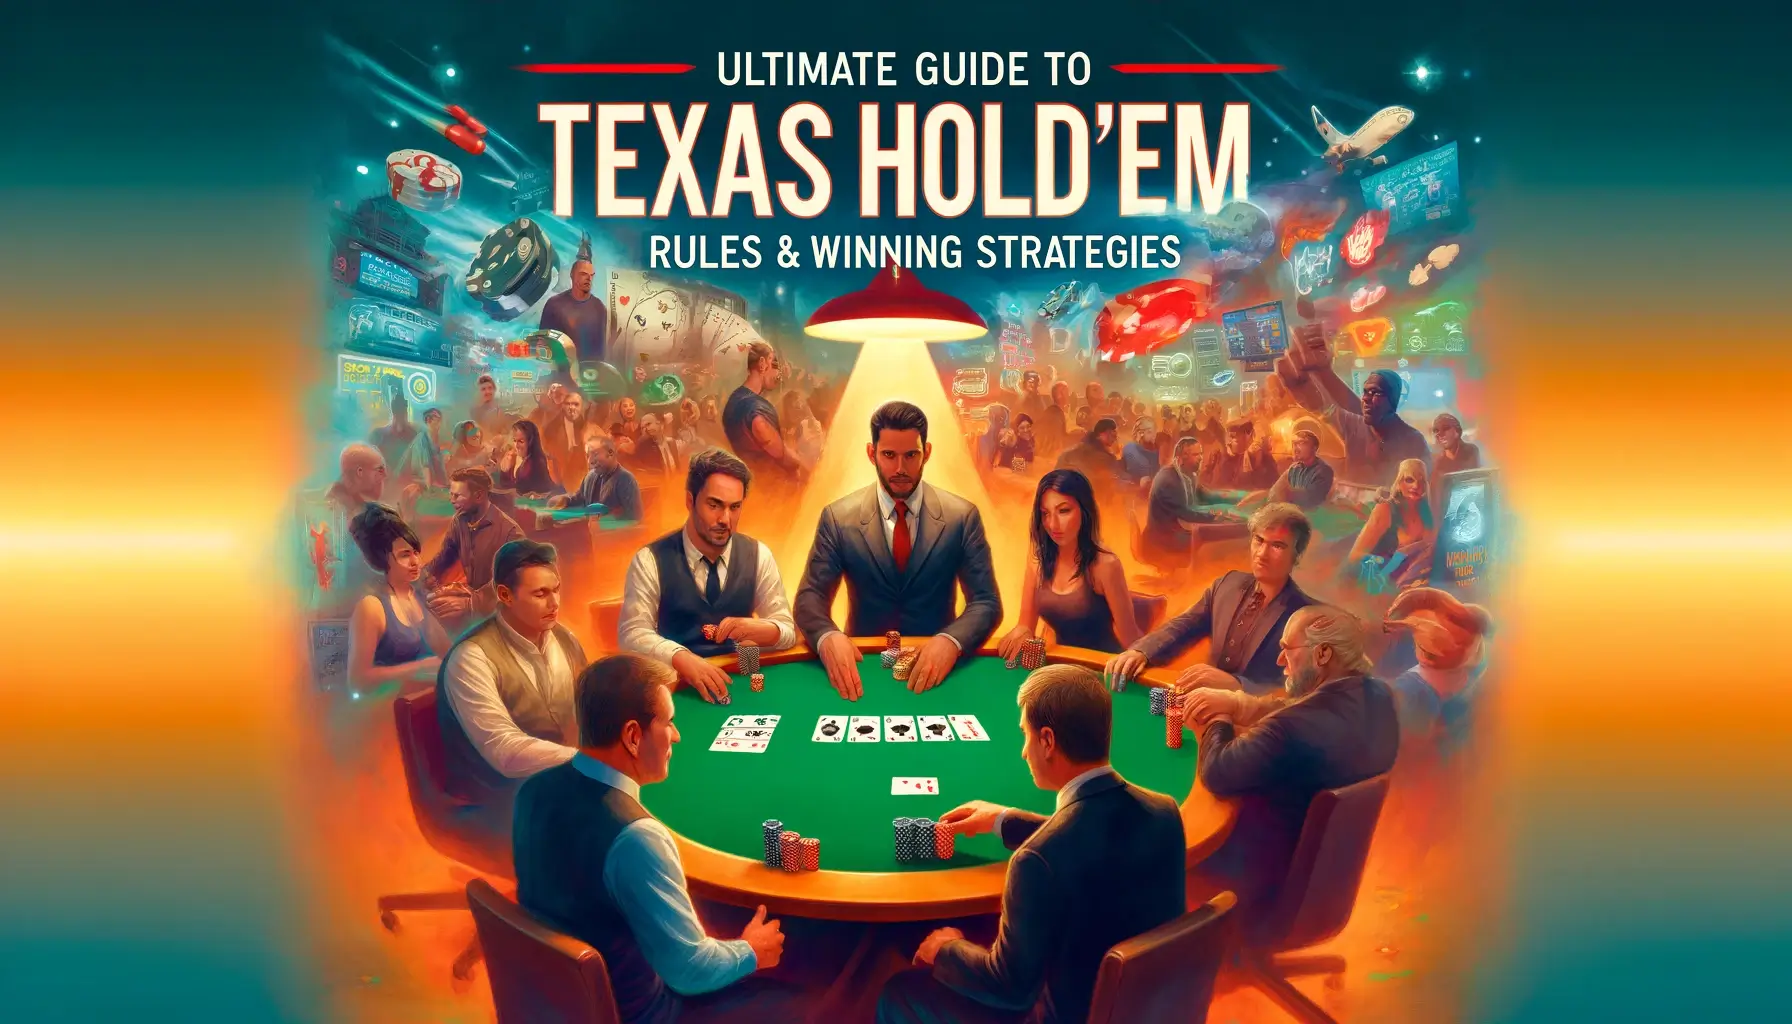 Texas Hold'em is the cornerstone of the poker world1